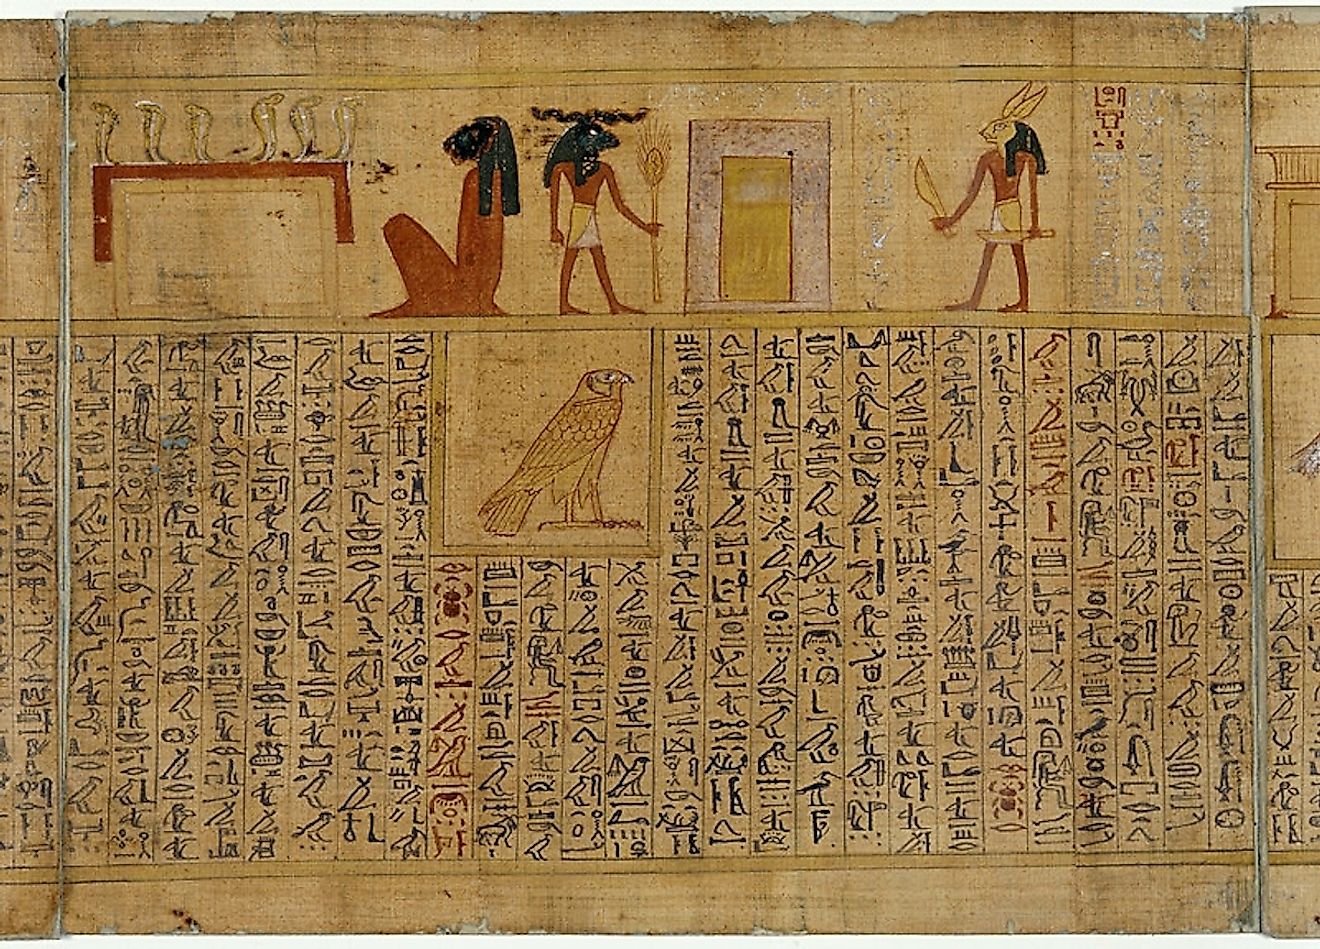 Egypt Papyrus. Image credit: National Museum in Warsaw/Public domain